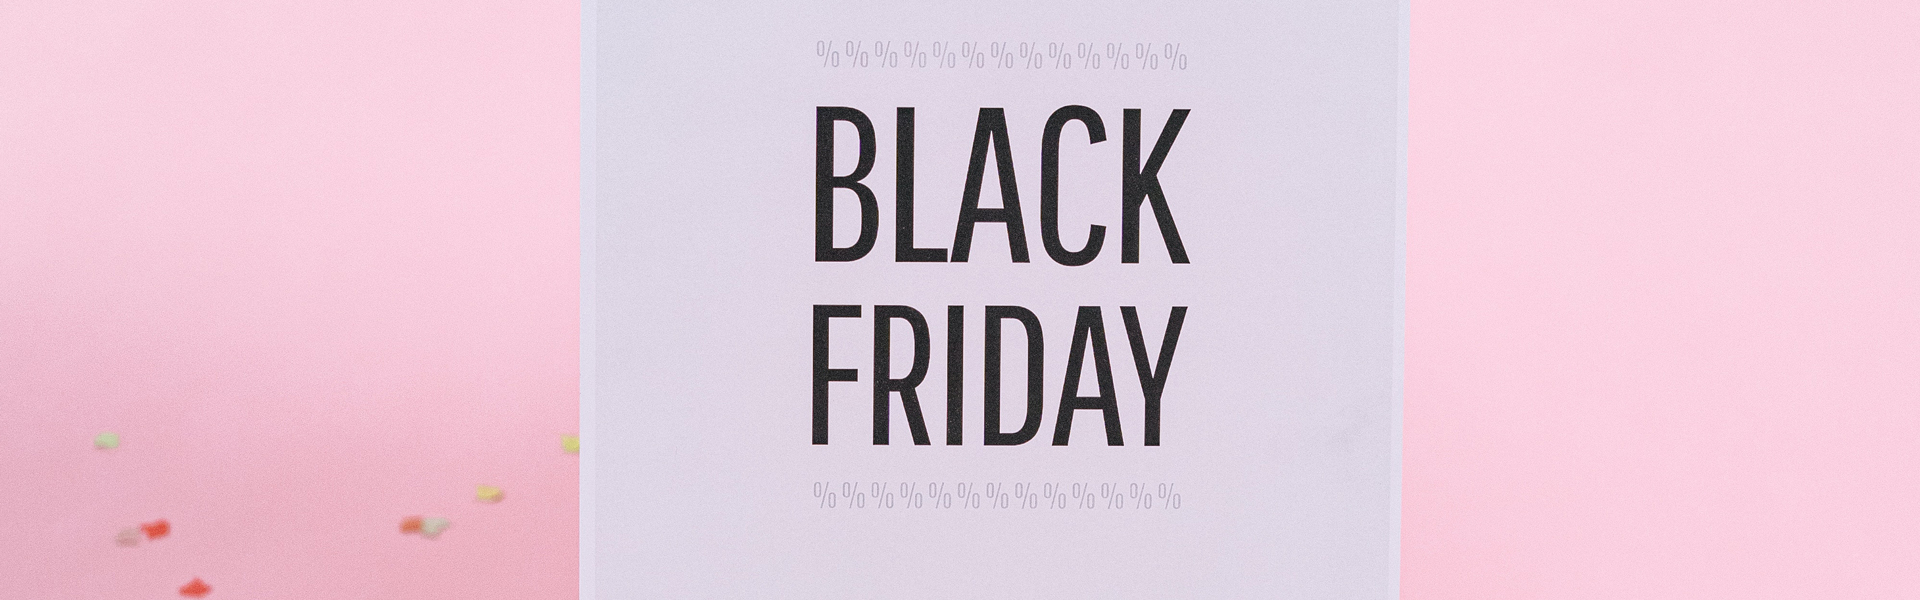 Black Friday for Small Businesses: Part 2 – The Practicals 